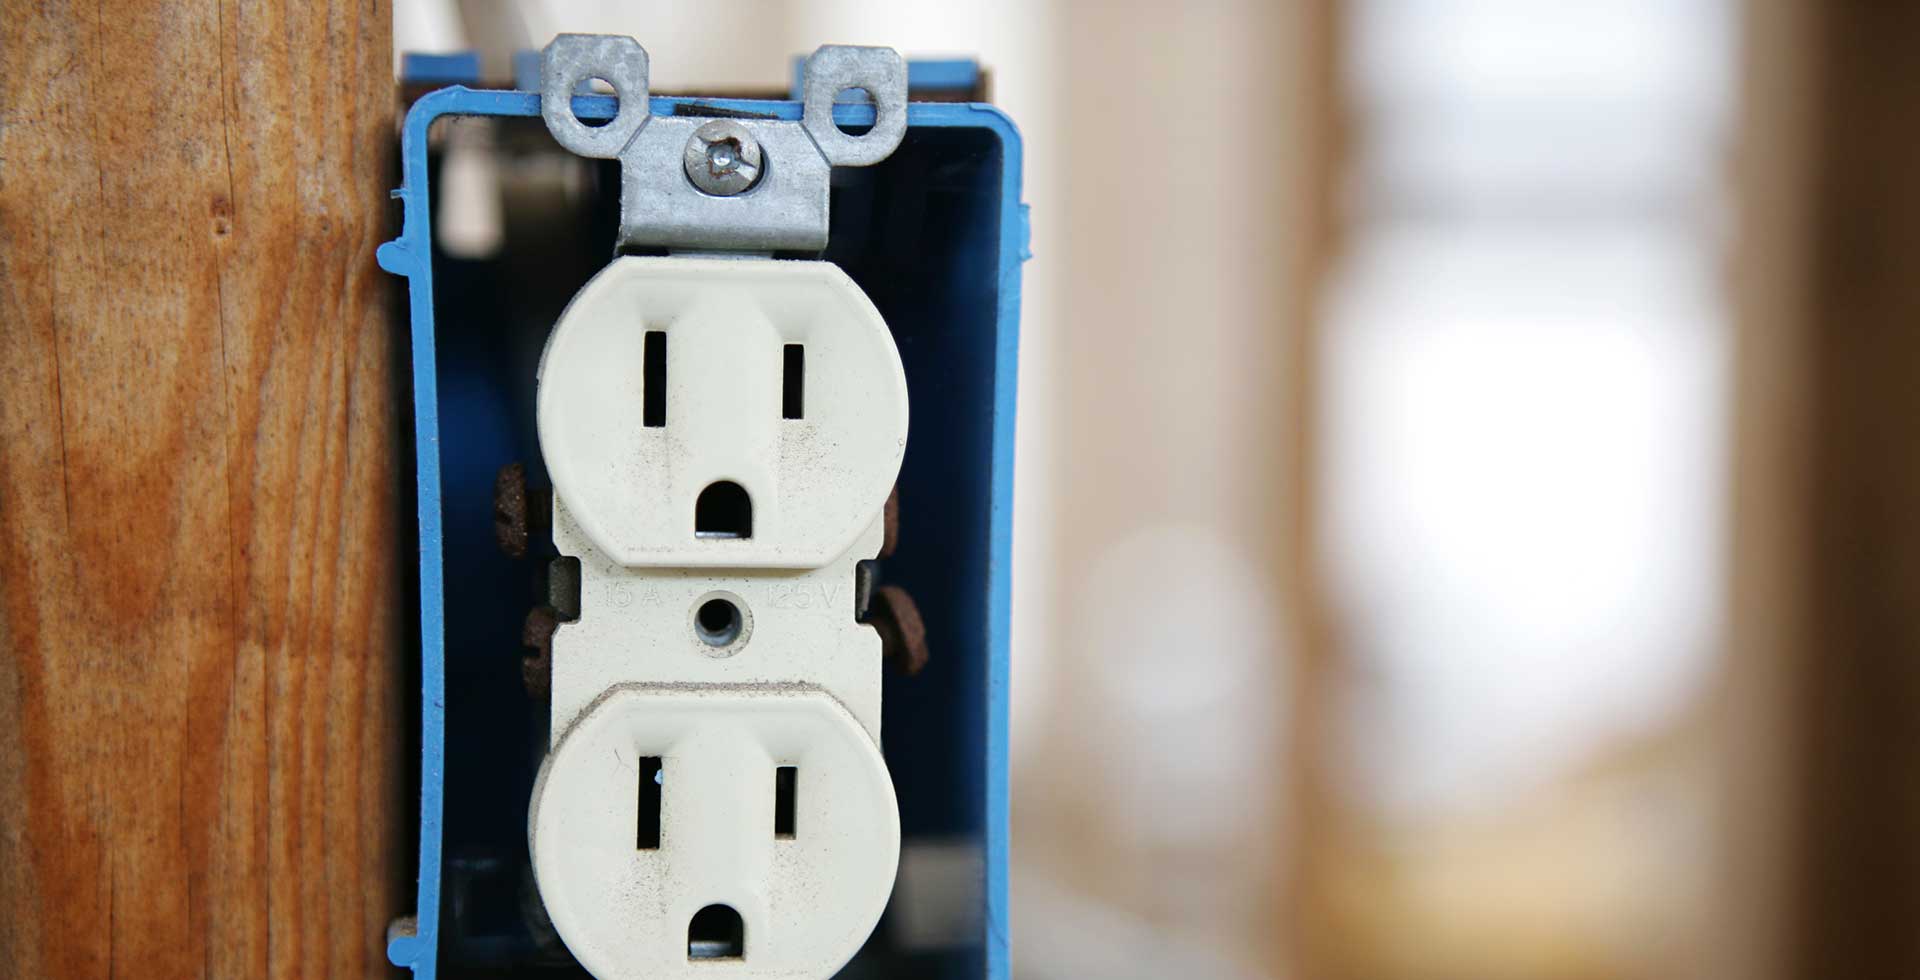 5 Warning Signs that Your Home or Business May Be at Risk of an Electrical  Hazard